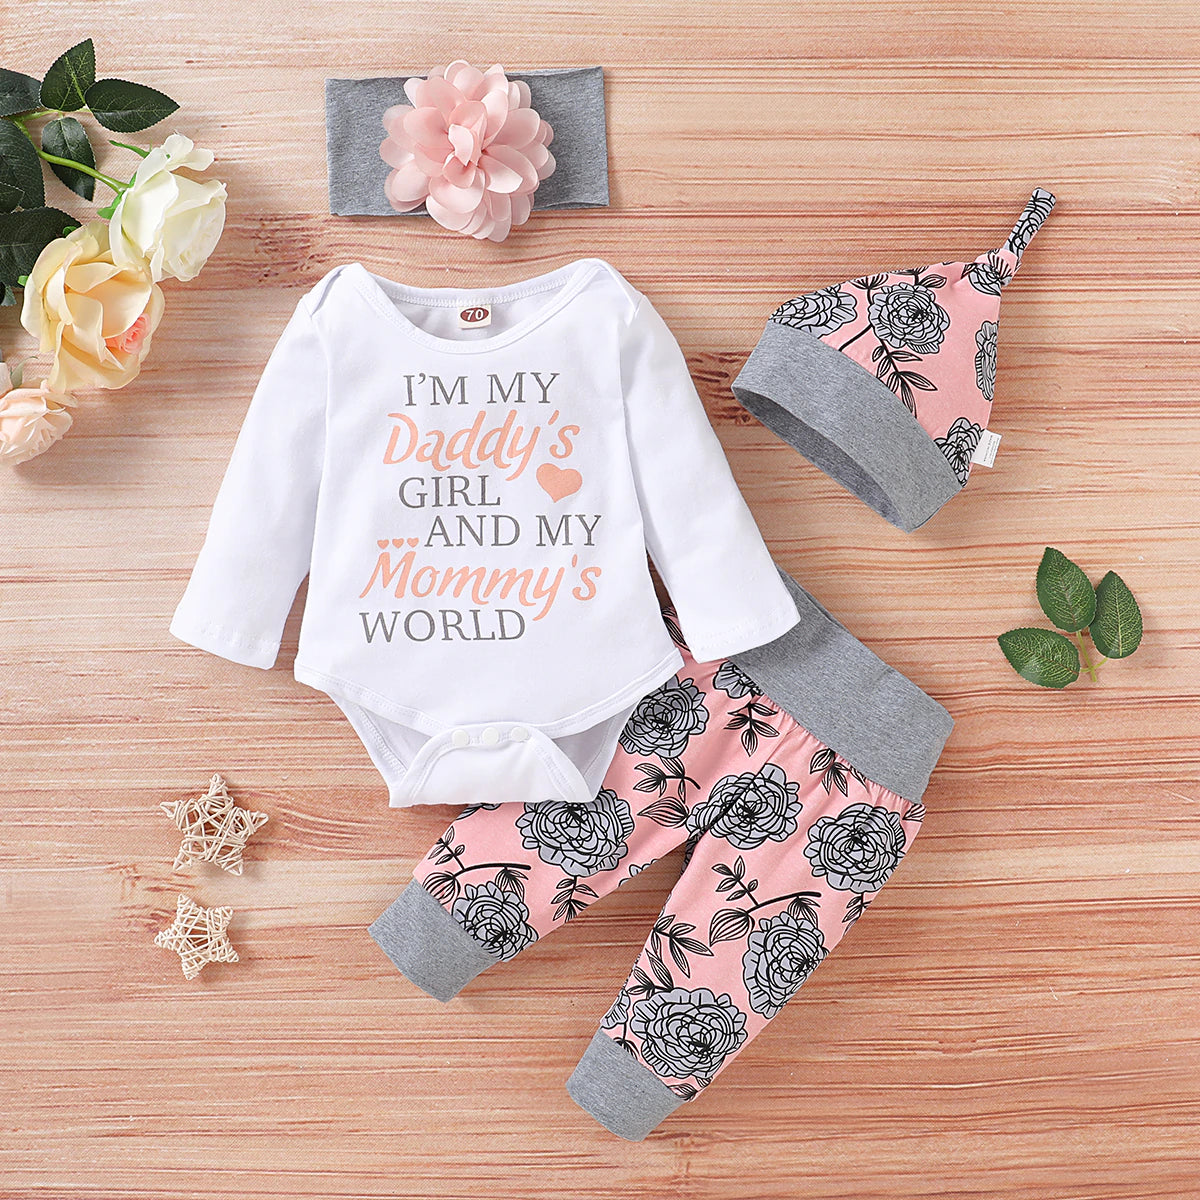 Baywell 3Pcs Baby Girl Outfit Set Newborn Toddler Girls Clothes Love  Printed Long Sleeve Bodysuit +Pants+Headband Clothing